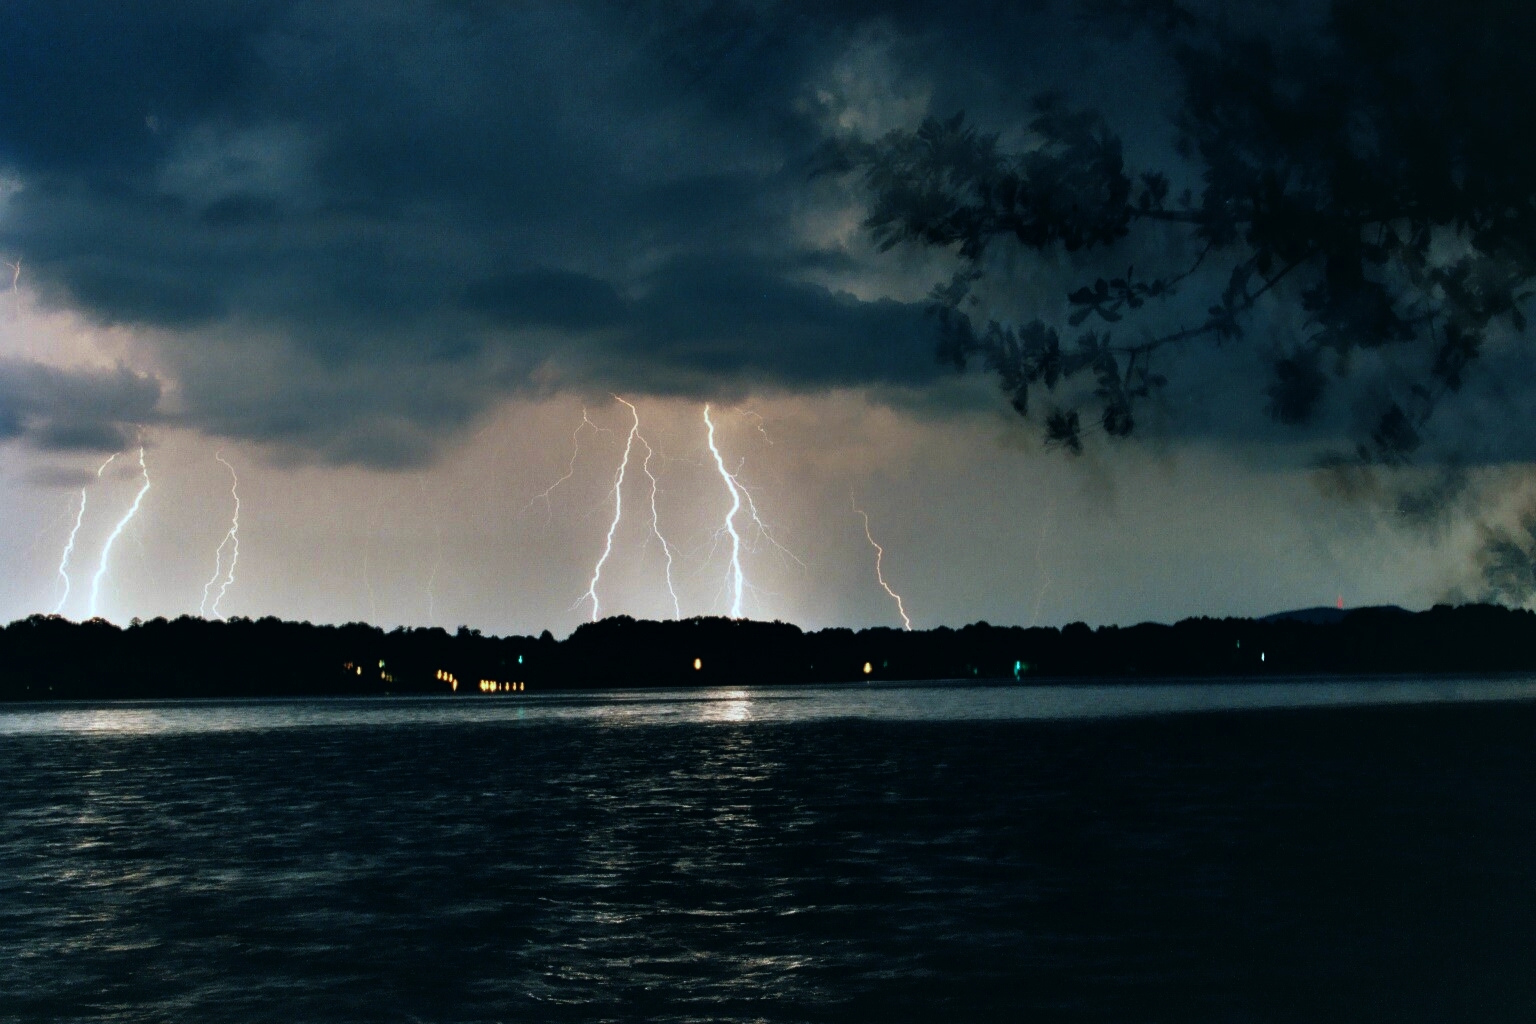 [Night%20Storm%20From%20Lake%20-%20June%202003%20-0015A[1].jpg]